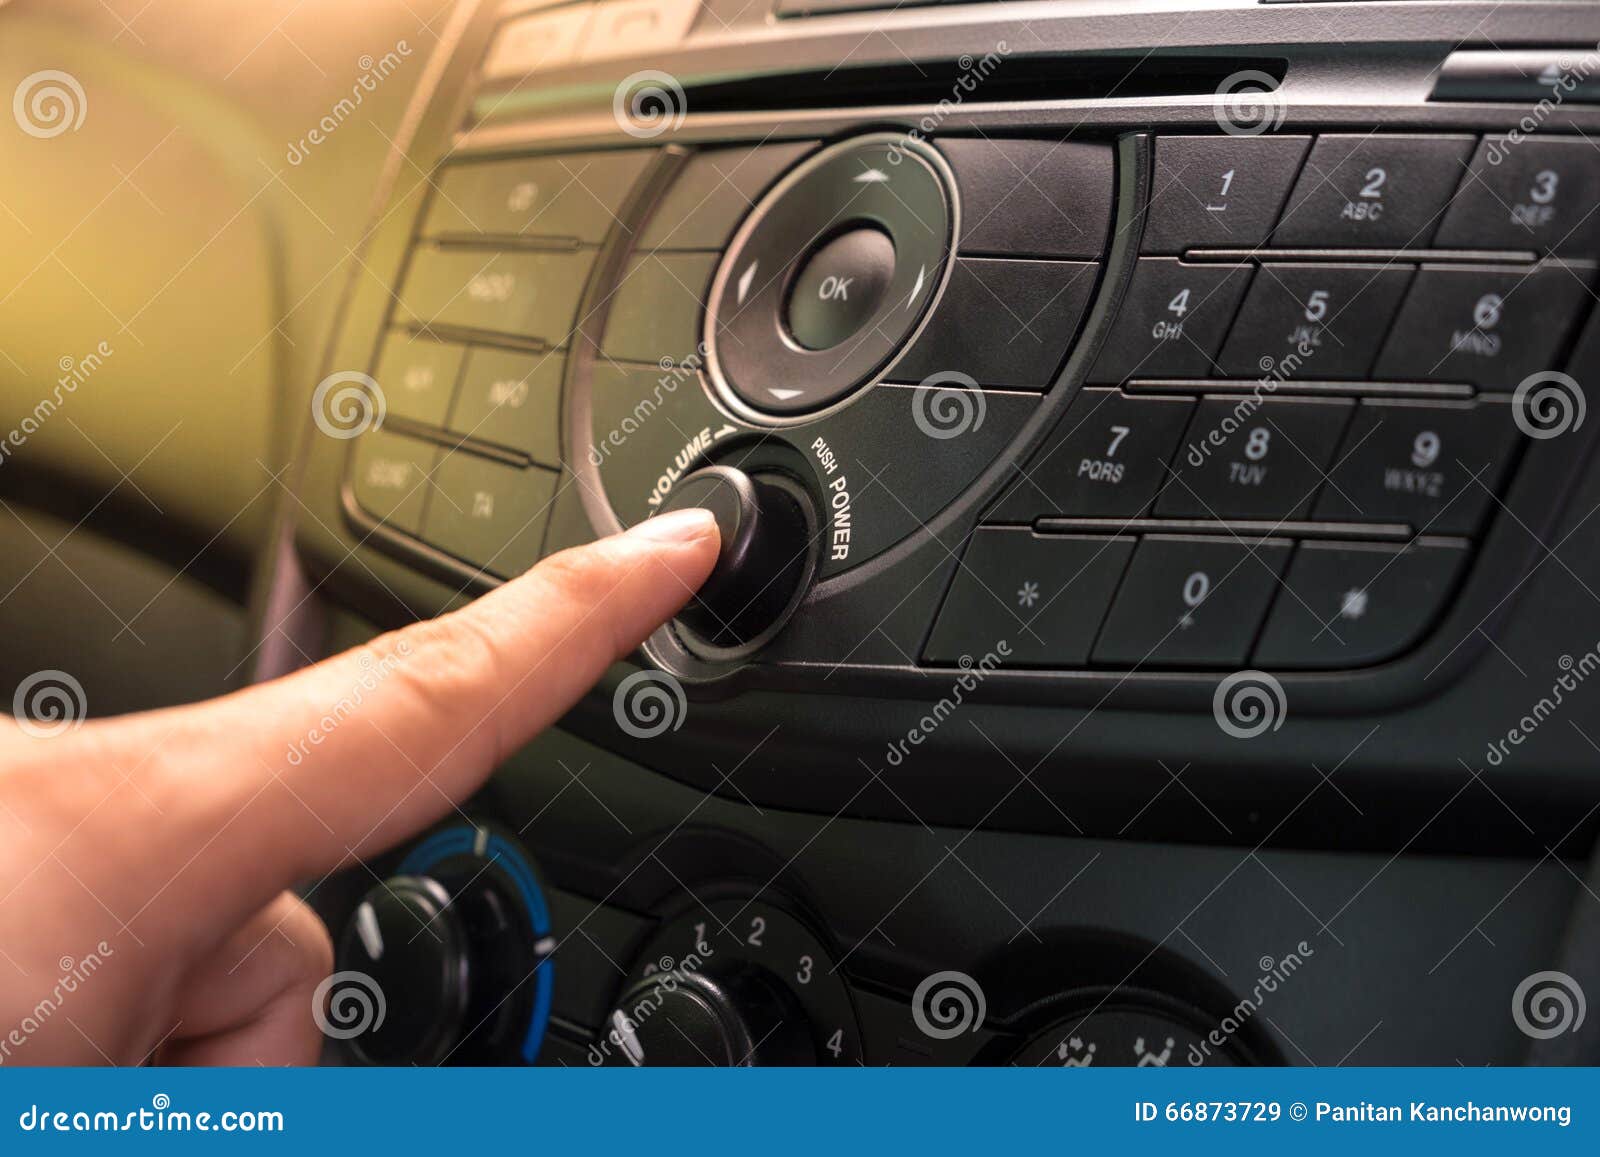 hand pushing the power button to turn on the car stereo